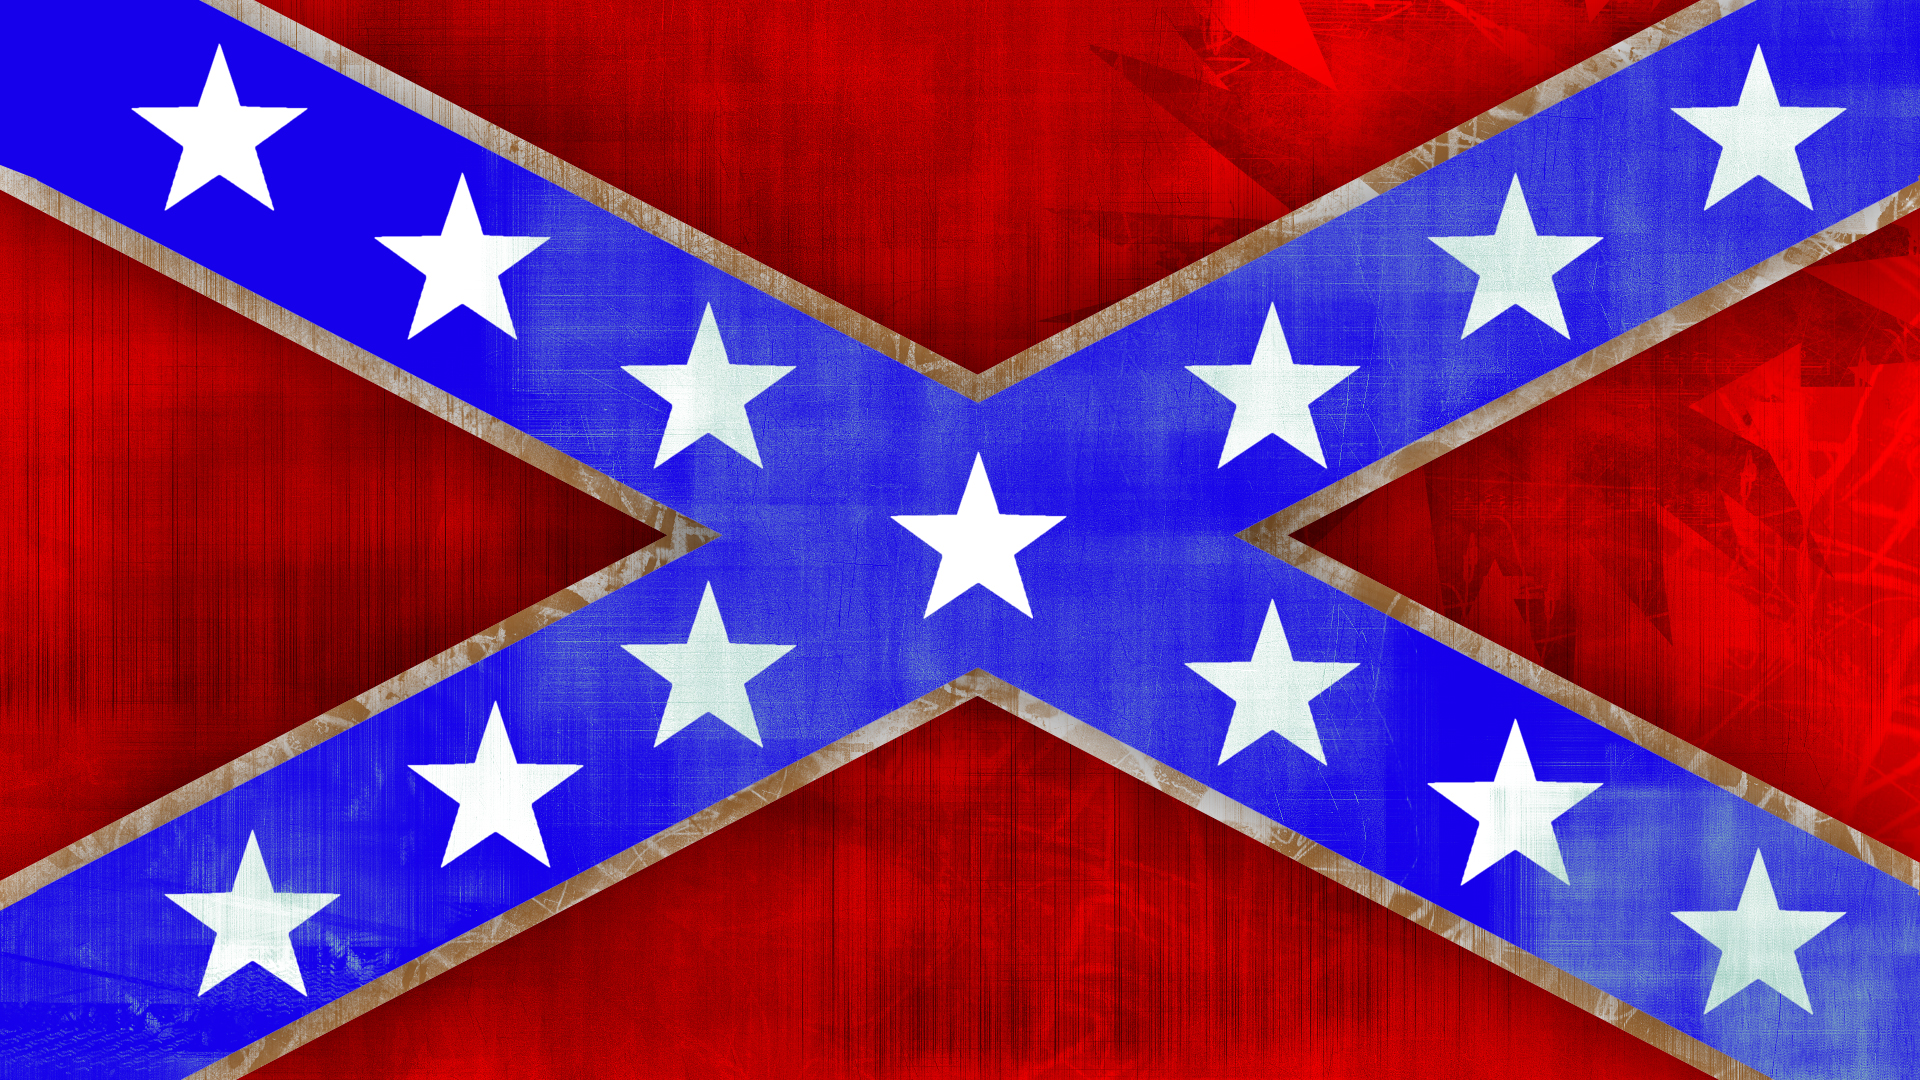 Cool Confederate Flag Wallpapers Images Pictures   Becuo